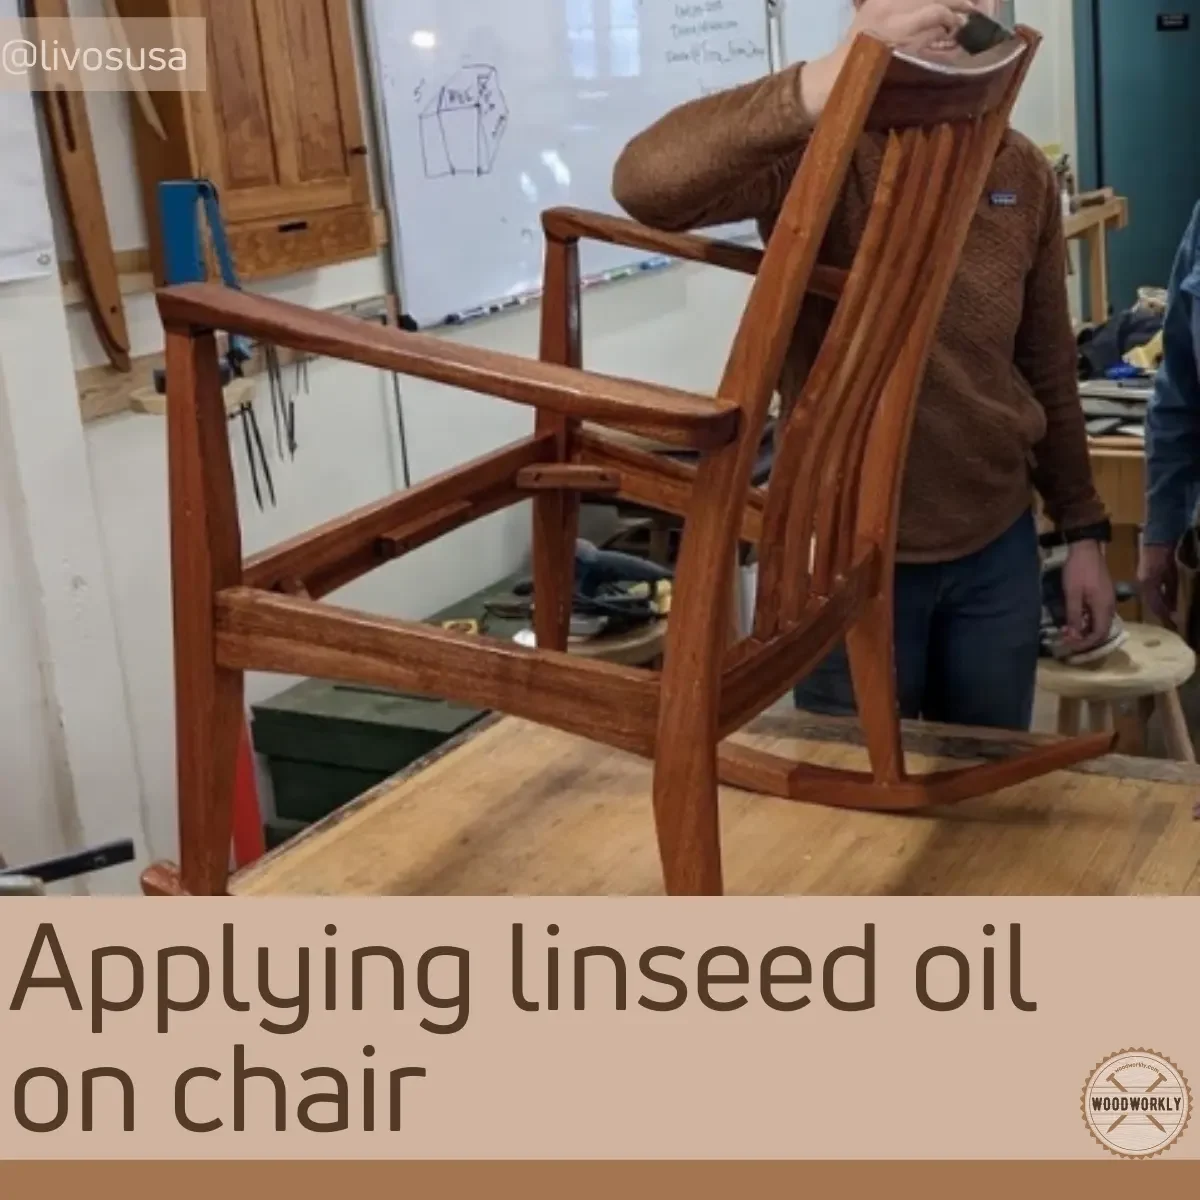 Applying linseed oil on chair